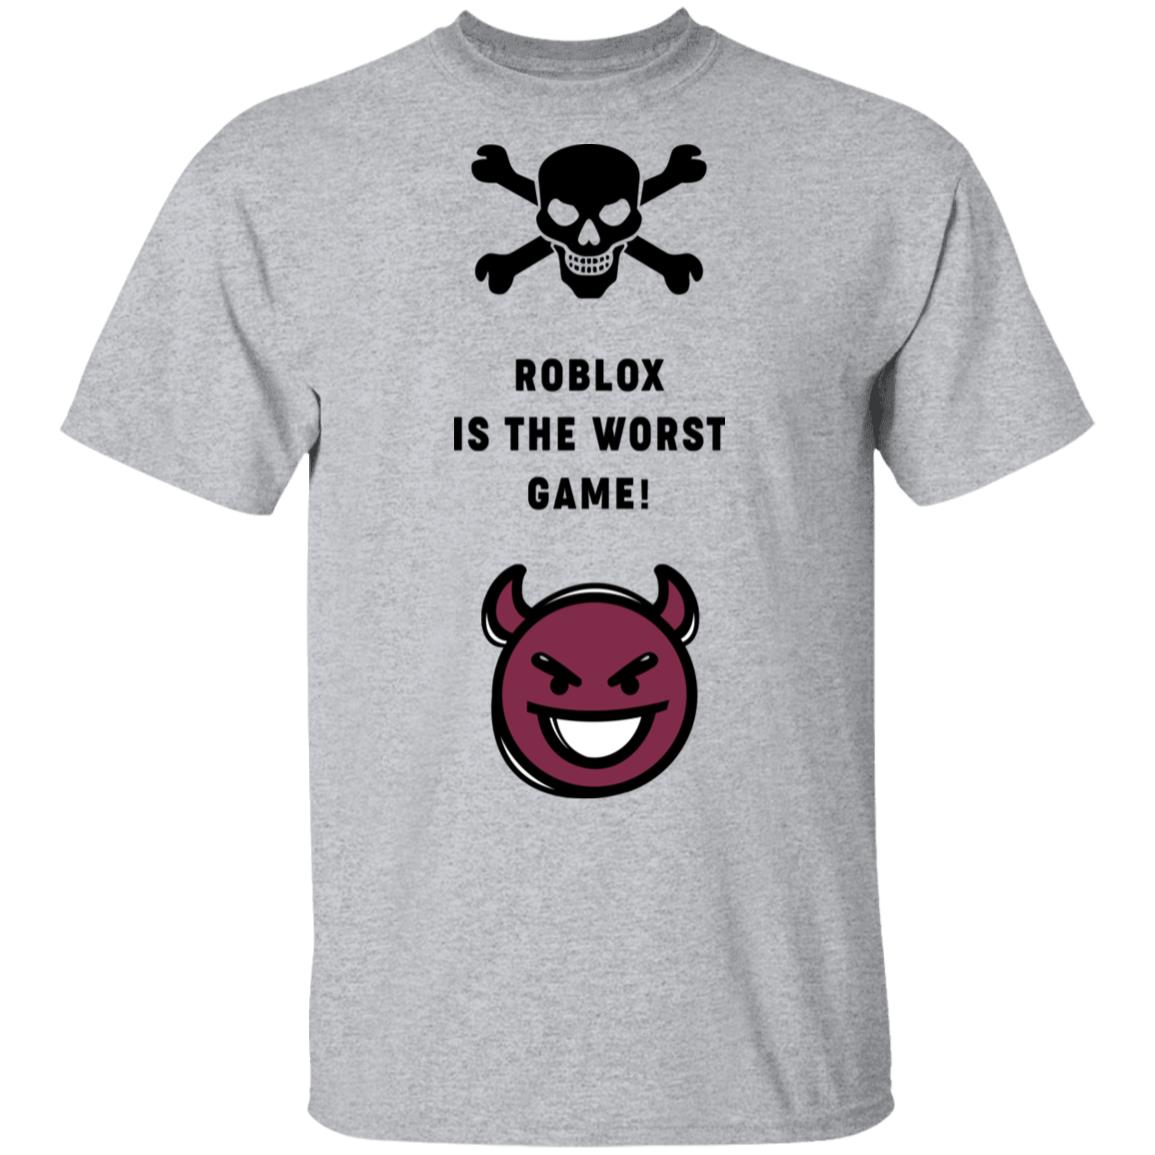 Roblox Is The Worst Game Funny Roblox Shirt Hoodie Tank 0stees - white tank roblox